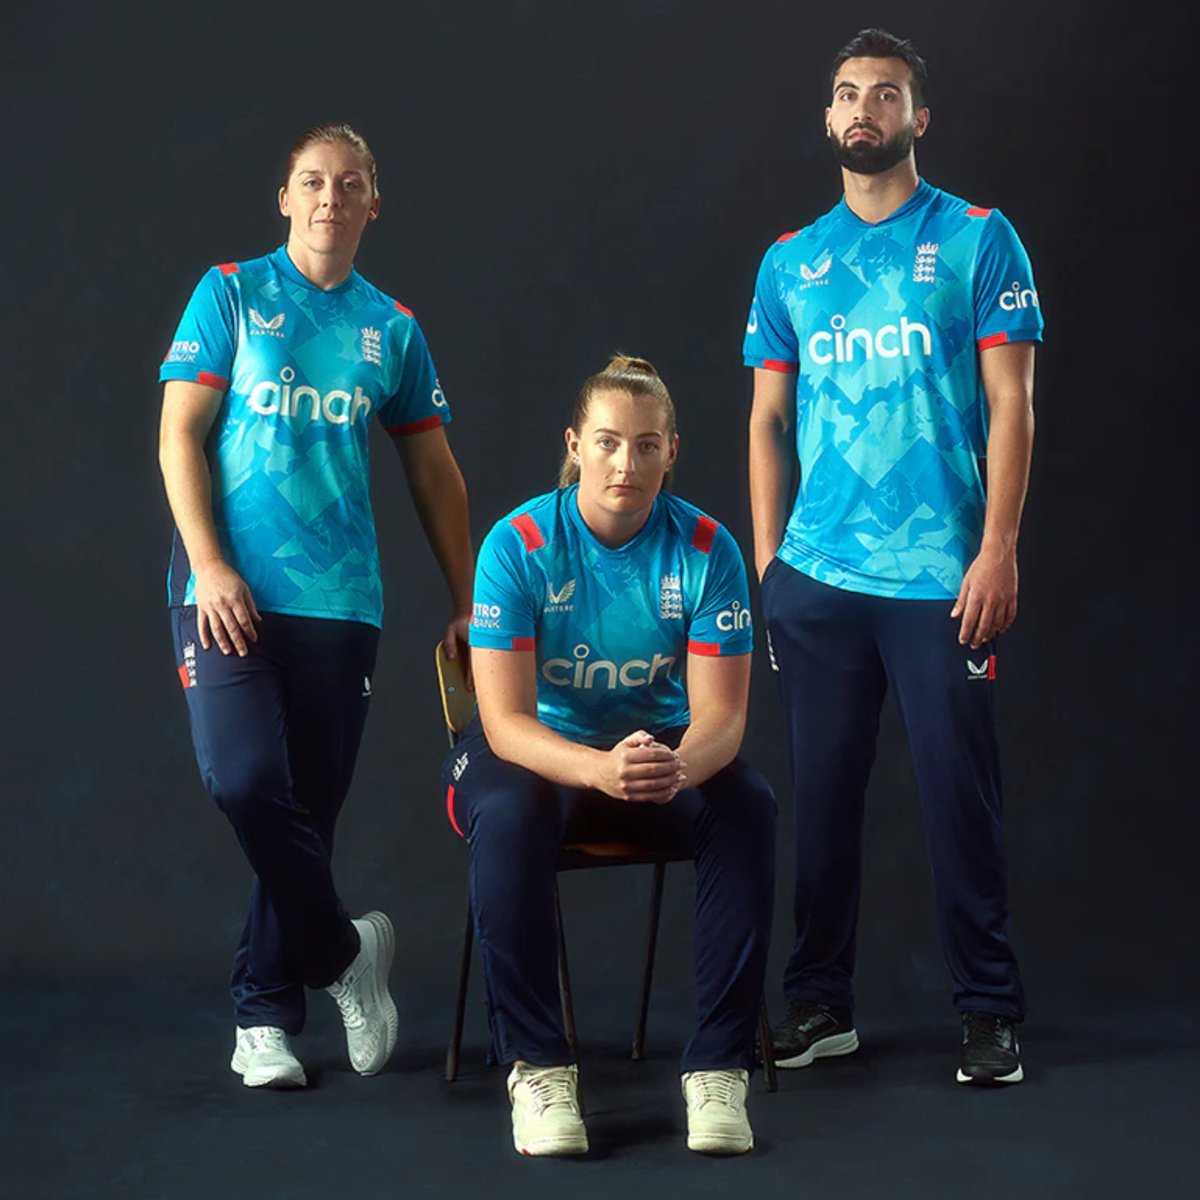 England have dropped their new ODI kit 🏴󠁧󠁢󠁥󠁮󠁧󠁿 (📸: @englandcricket)